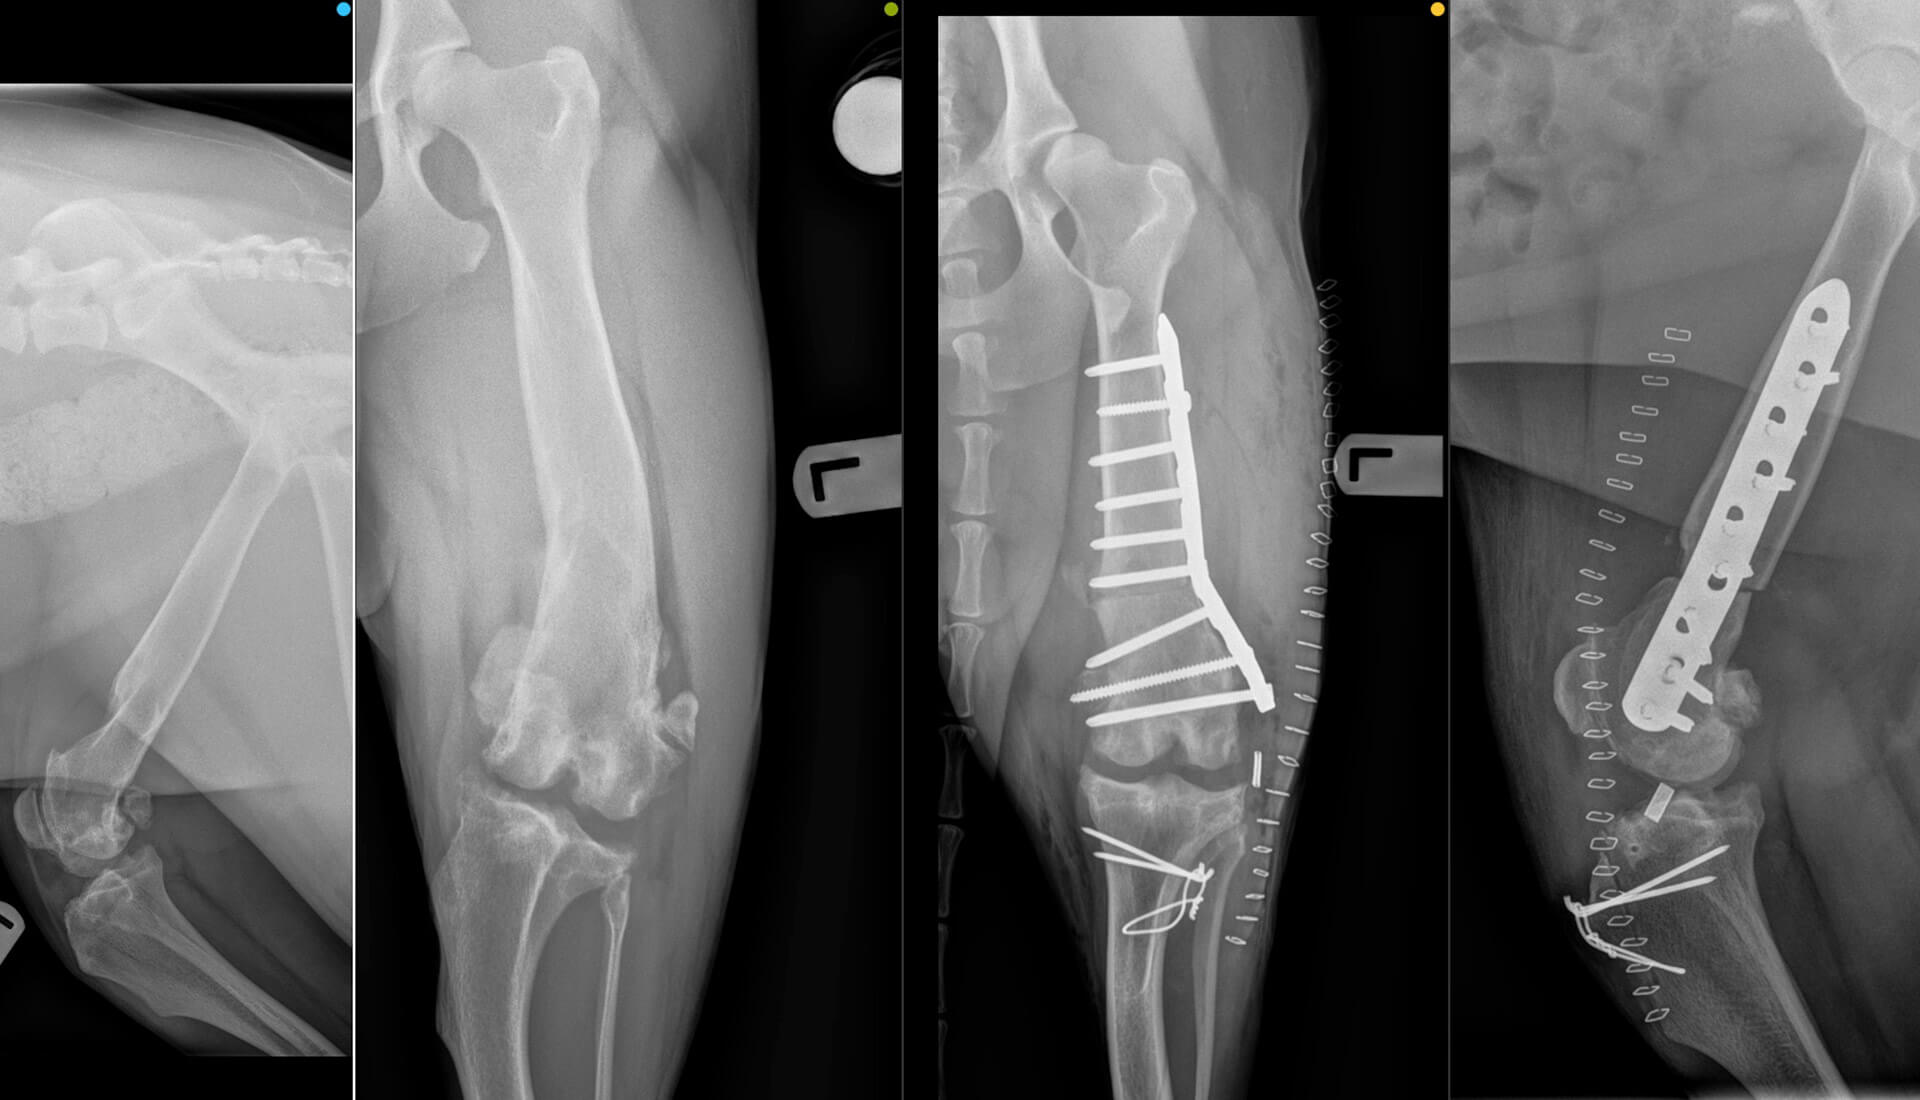 Xrays show the before and after of a surgery.